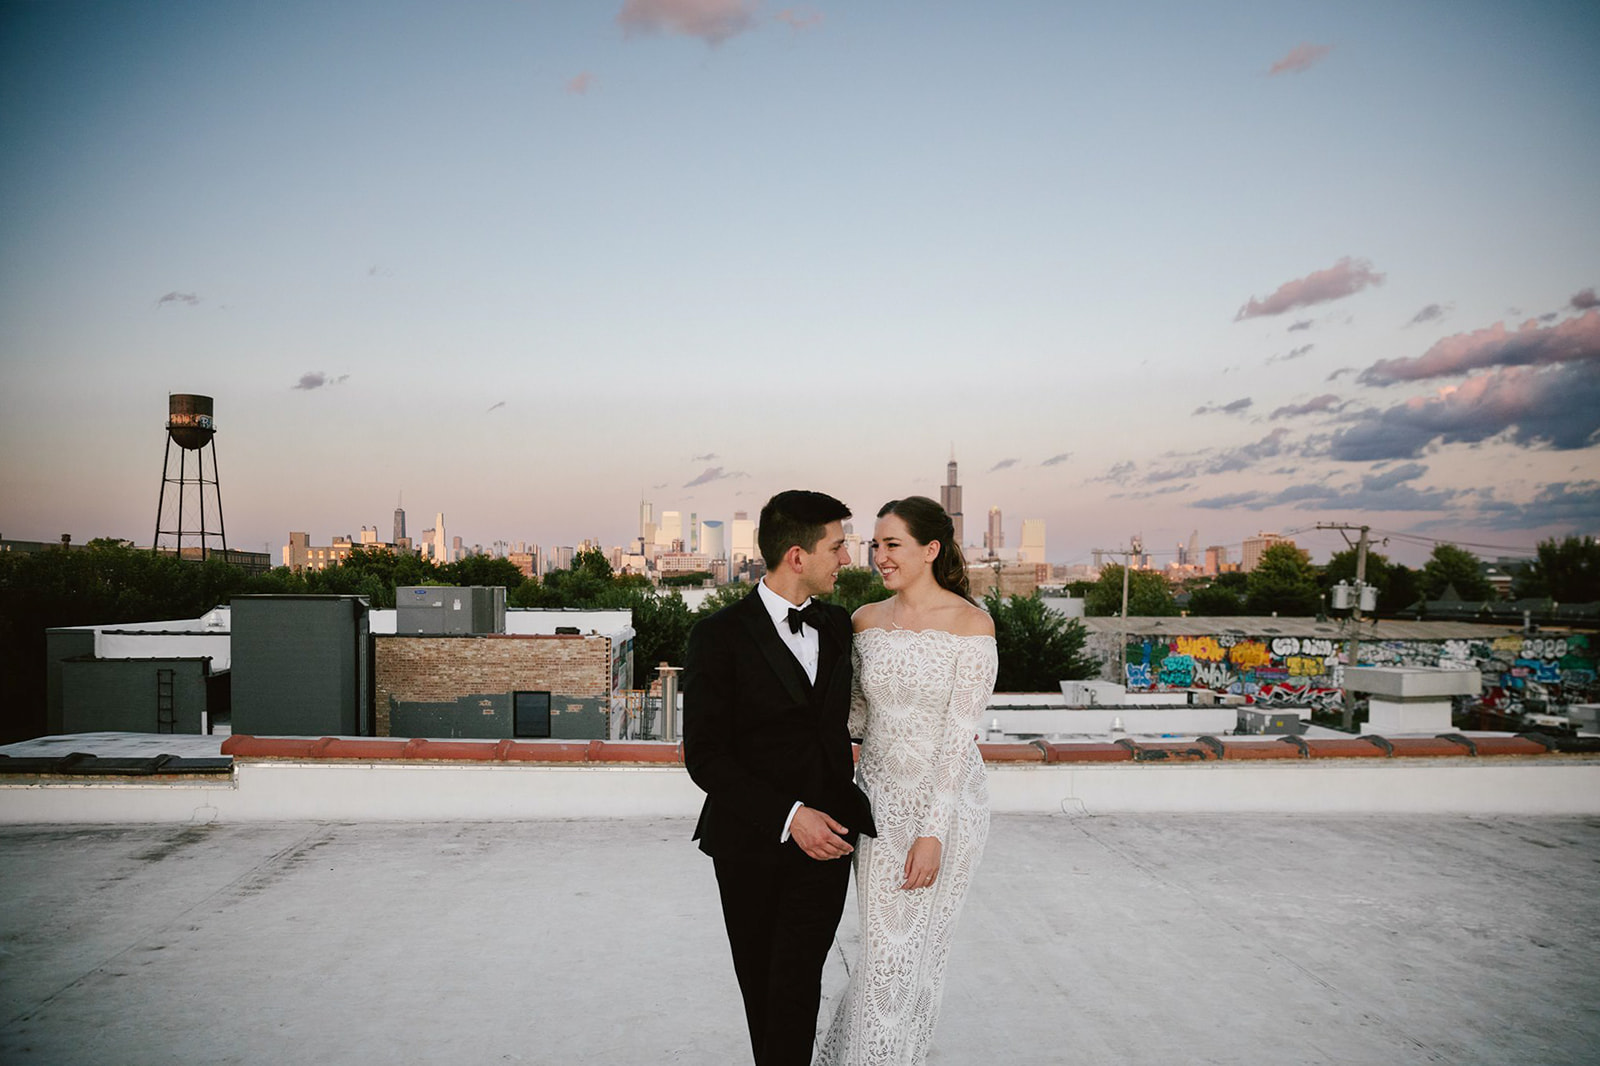 Sunset bliss: Newlyweds at Walden Chicago's rooftop, sharing a moment of pure love against the city skyline.